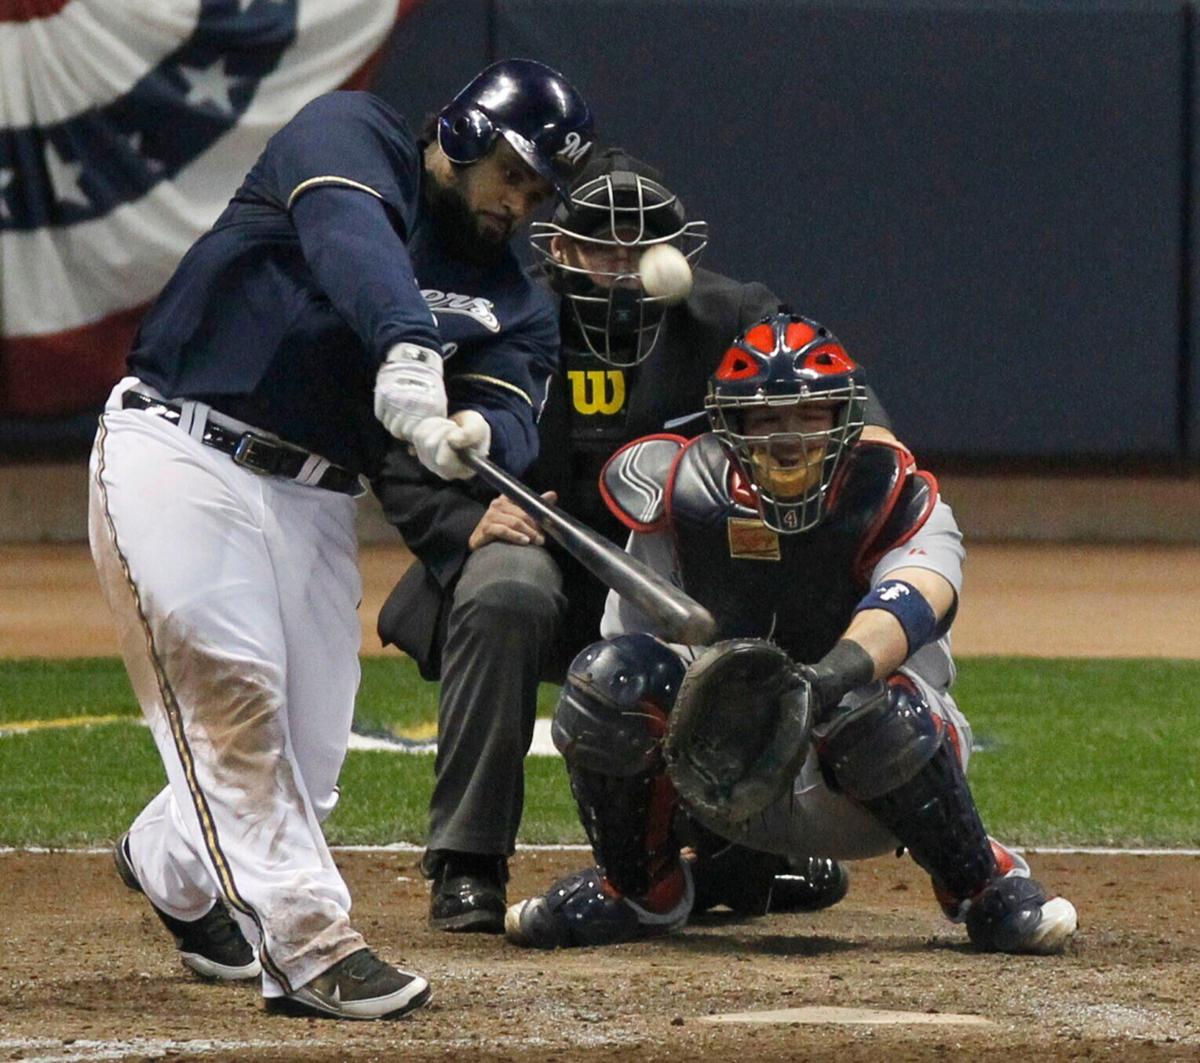 Milwaukee Brewer Prince Fielder Named MVP as the National League Defeats  the American League in 2011 All Star Game